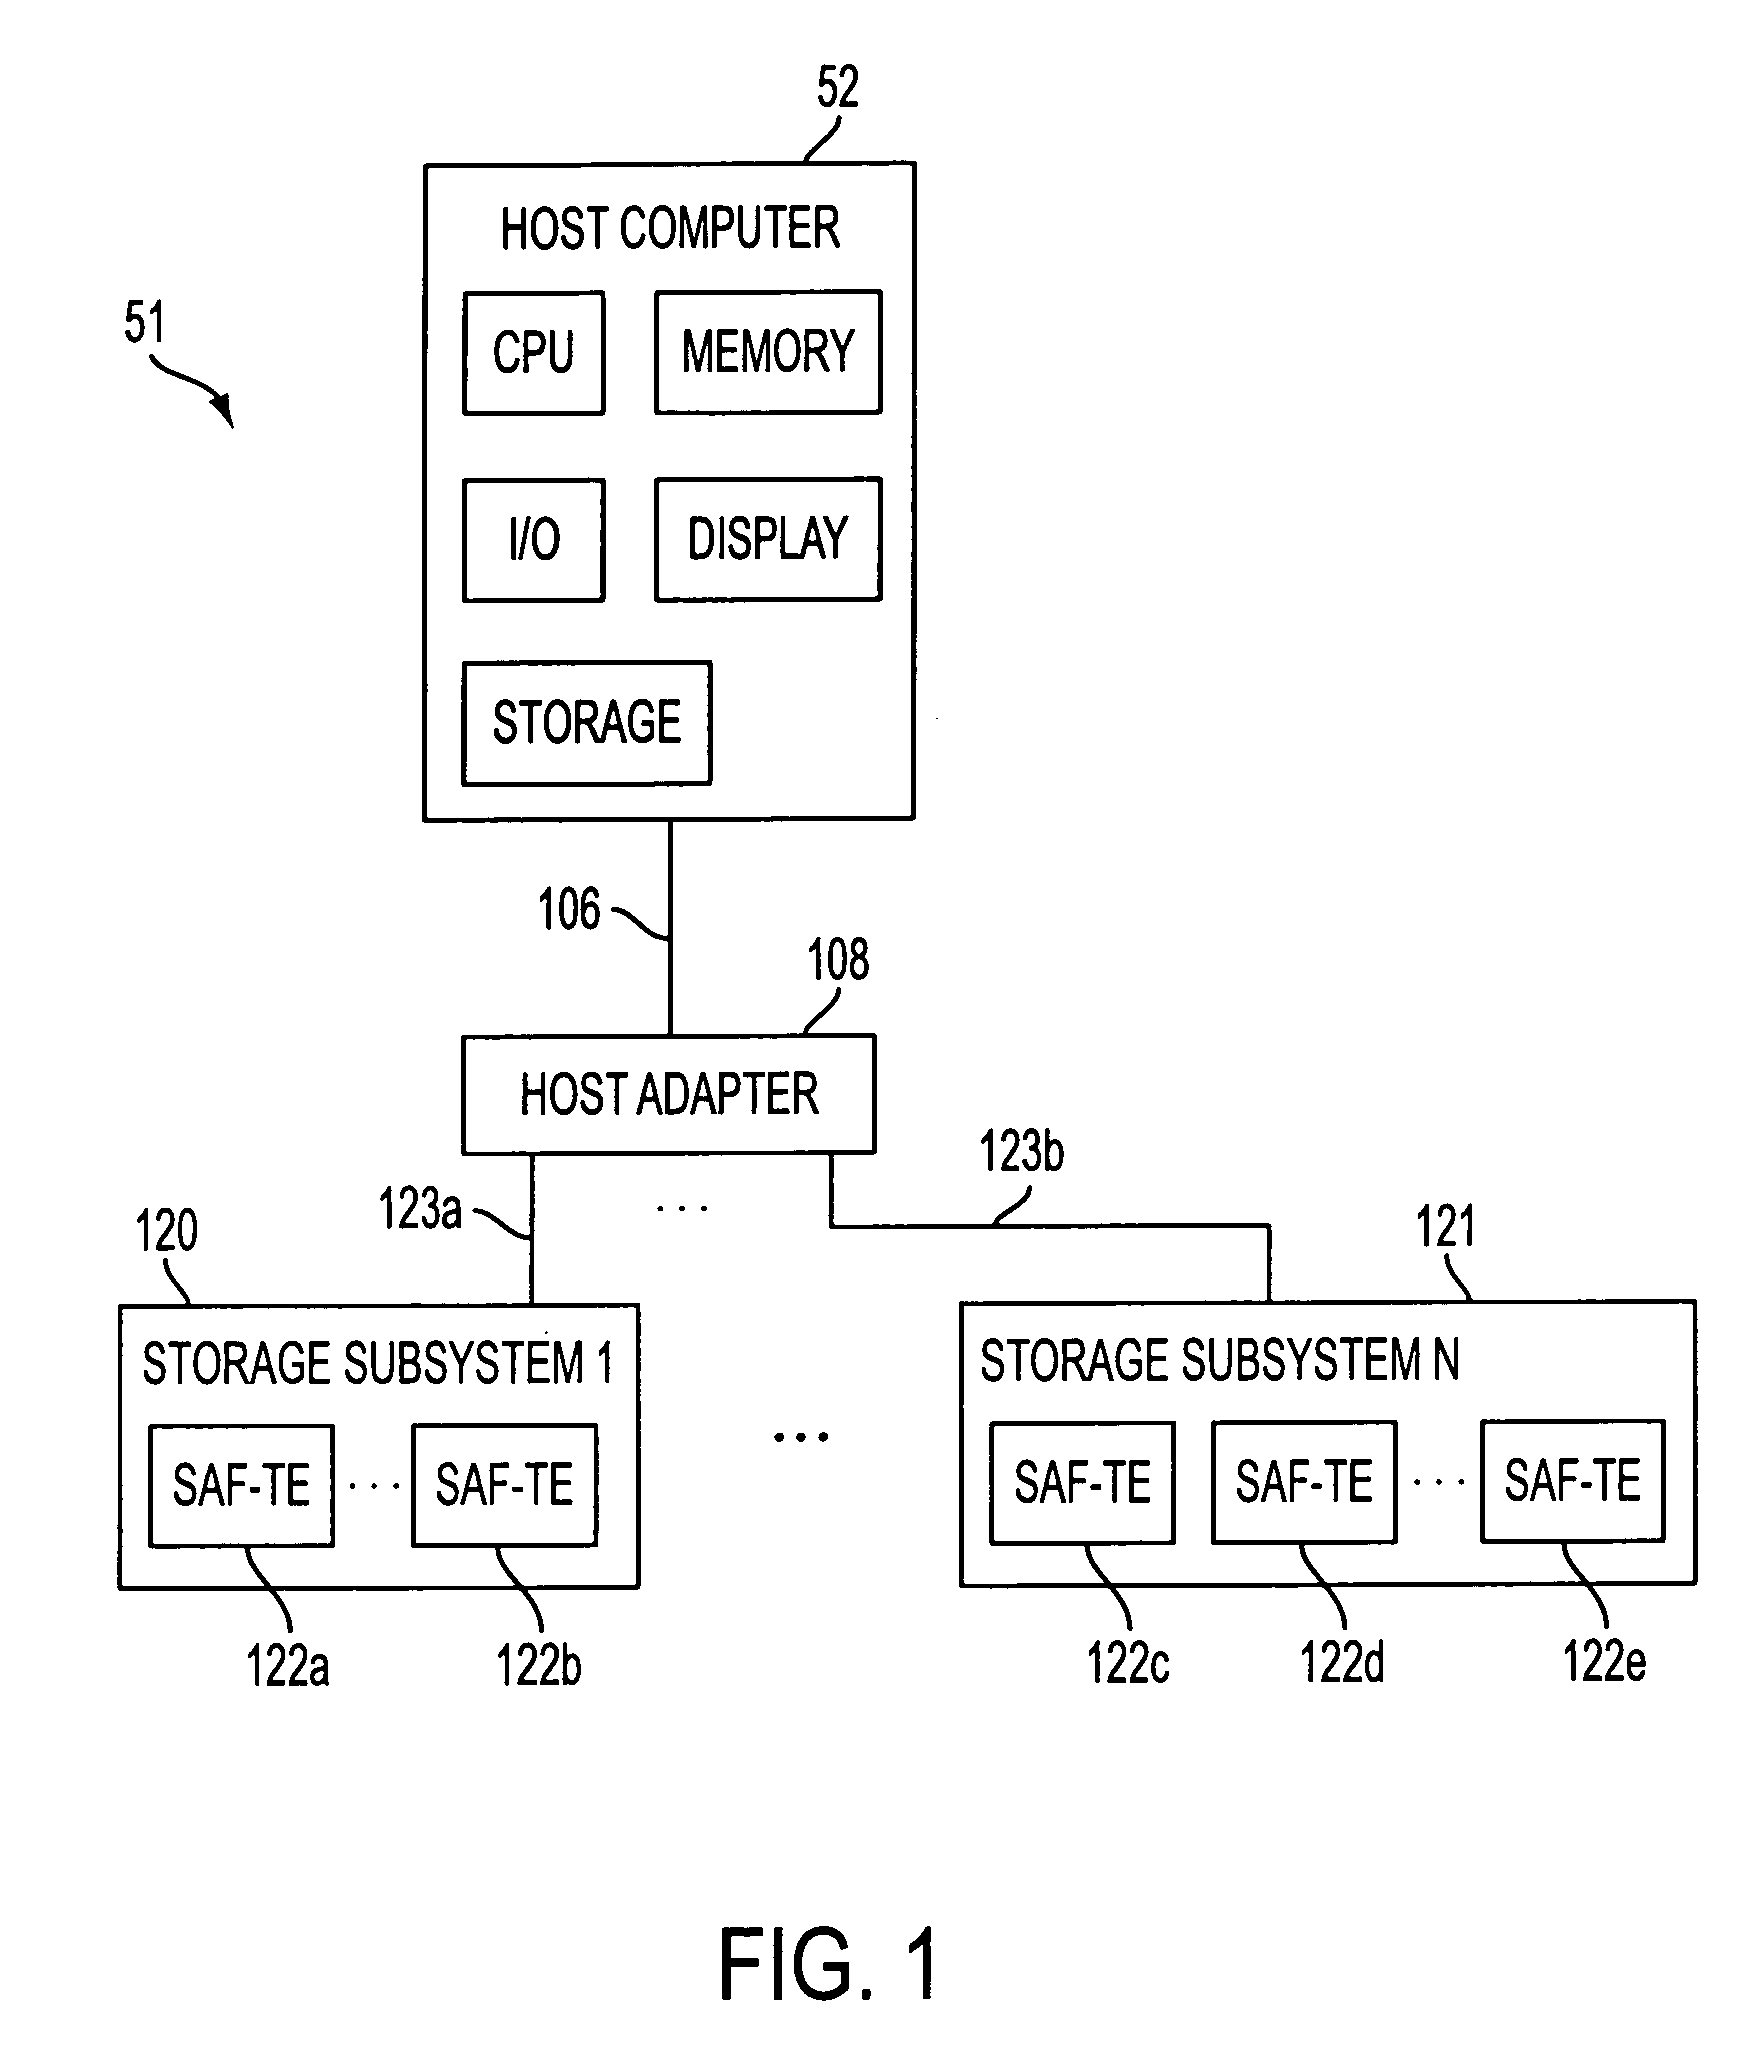 Method and structure for efficiently retrieving status for SCSI accessed fault-tolerant enclosure (SAF-TE) systems